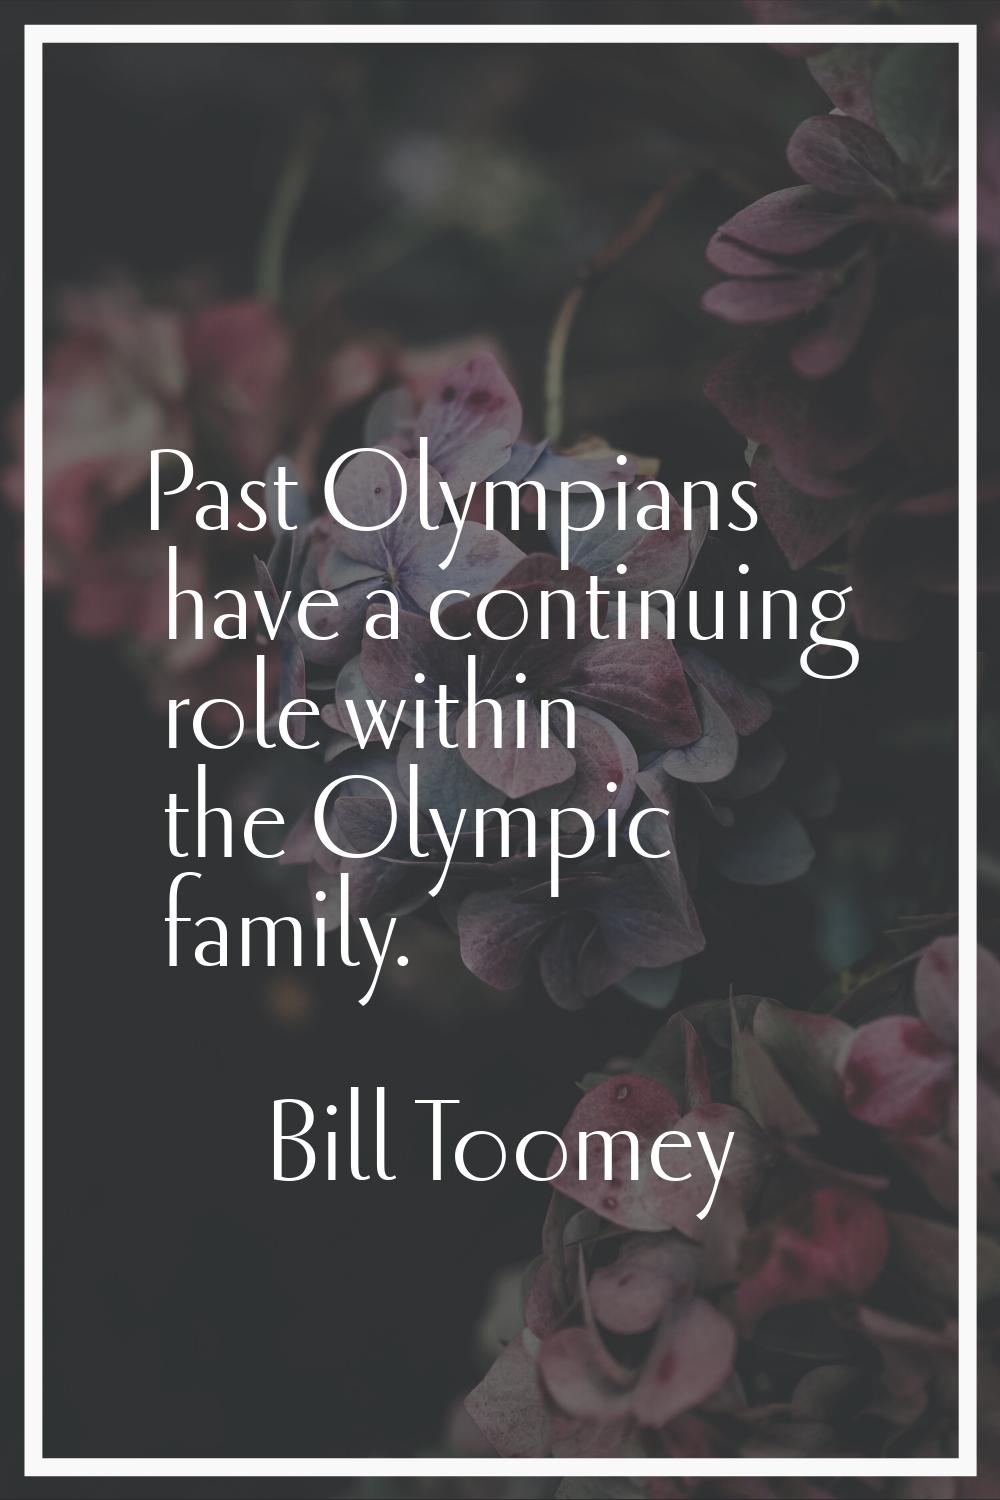 Past Olympians have a continuing role within the Olympic family.